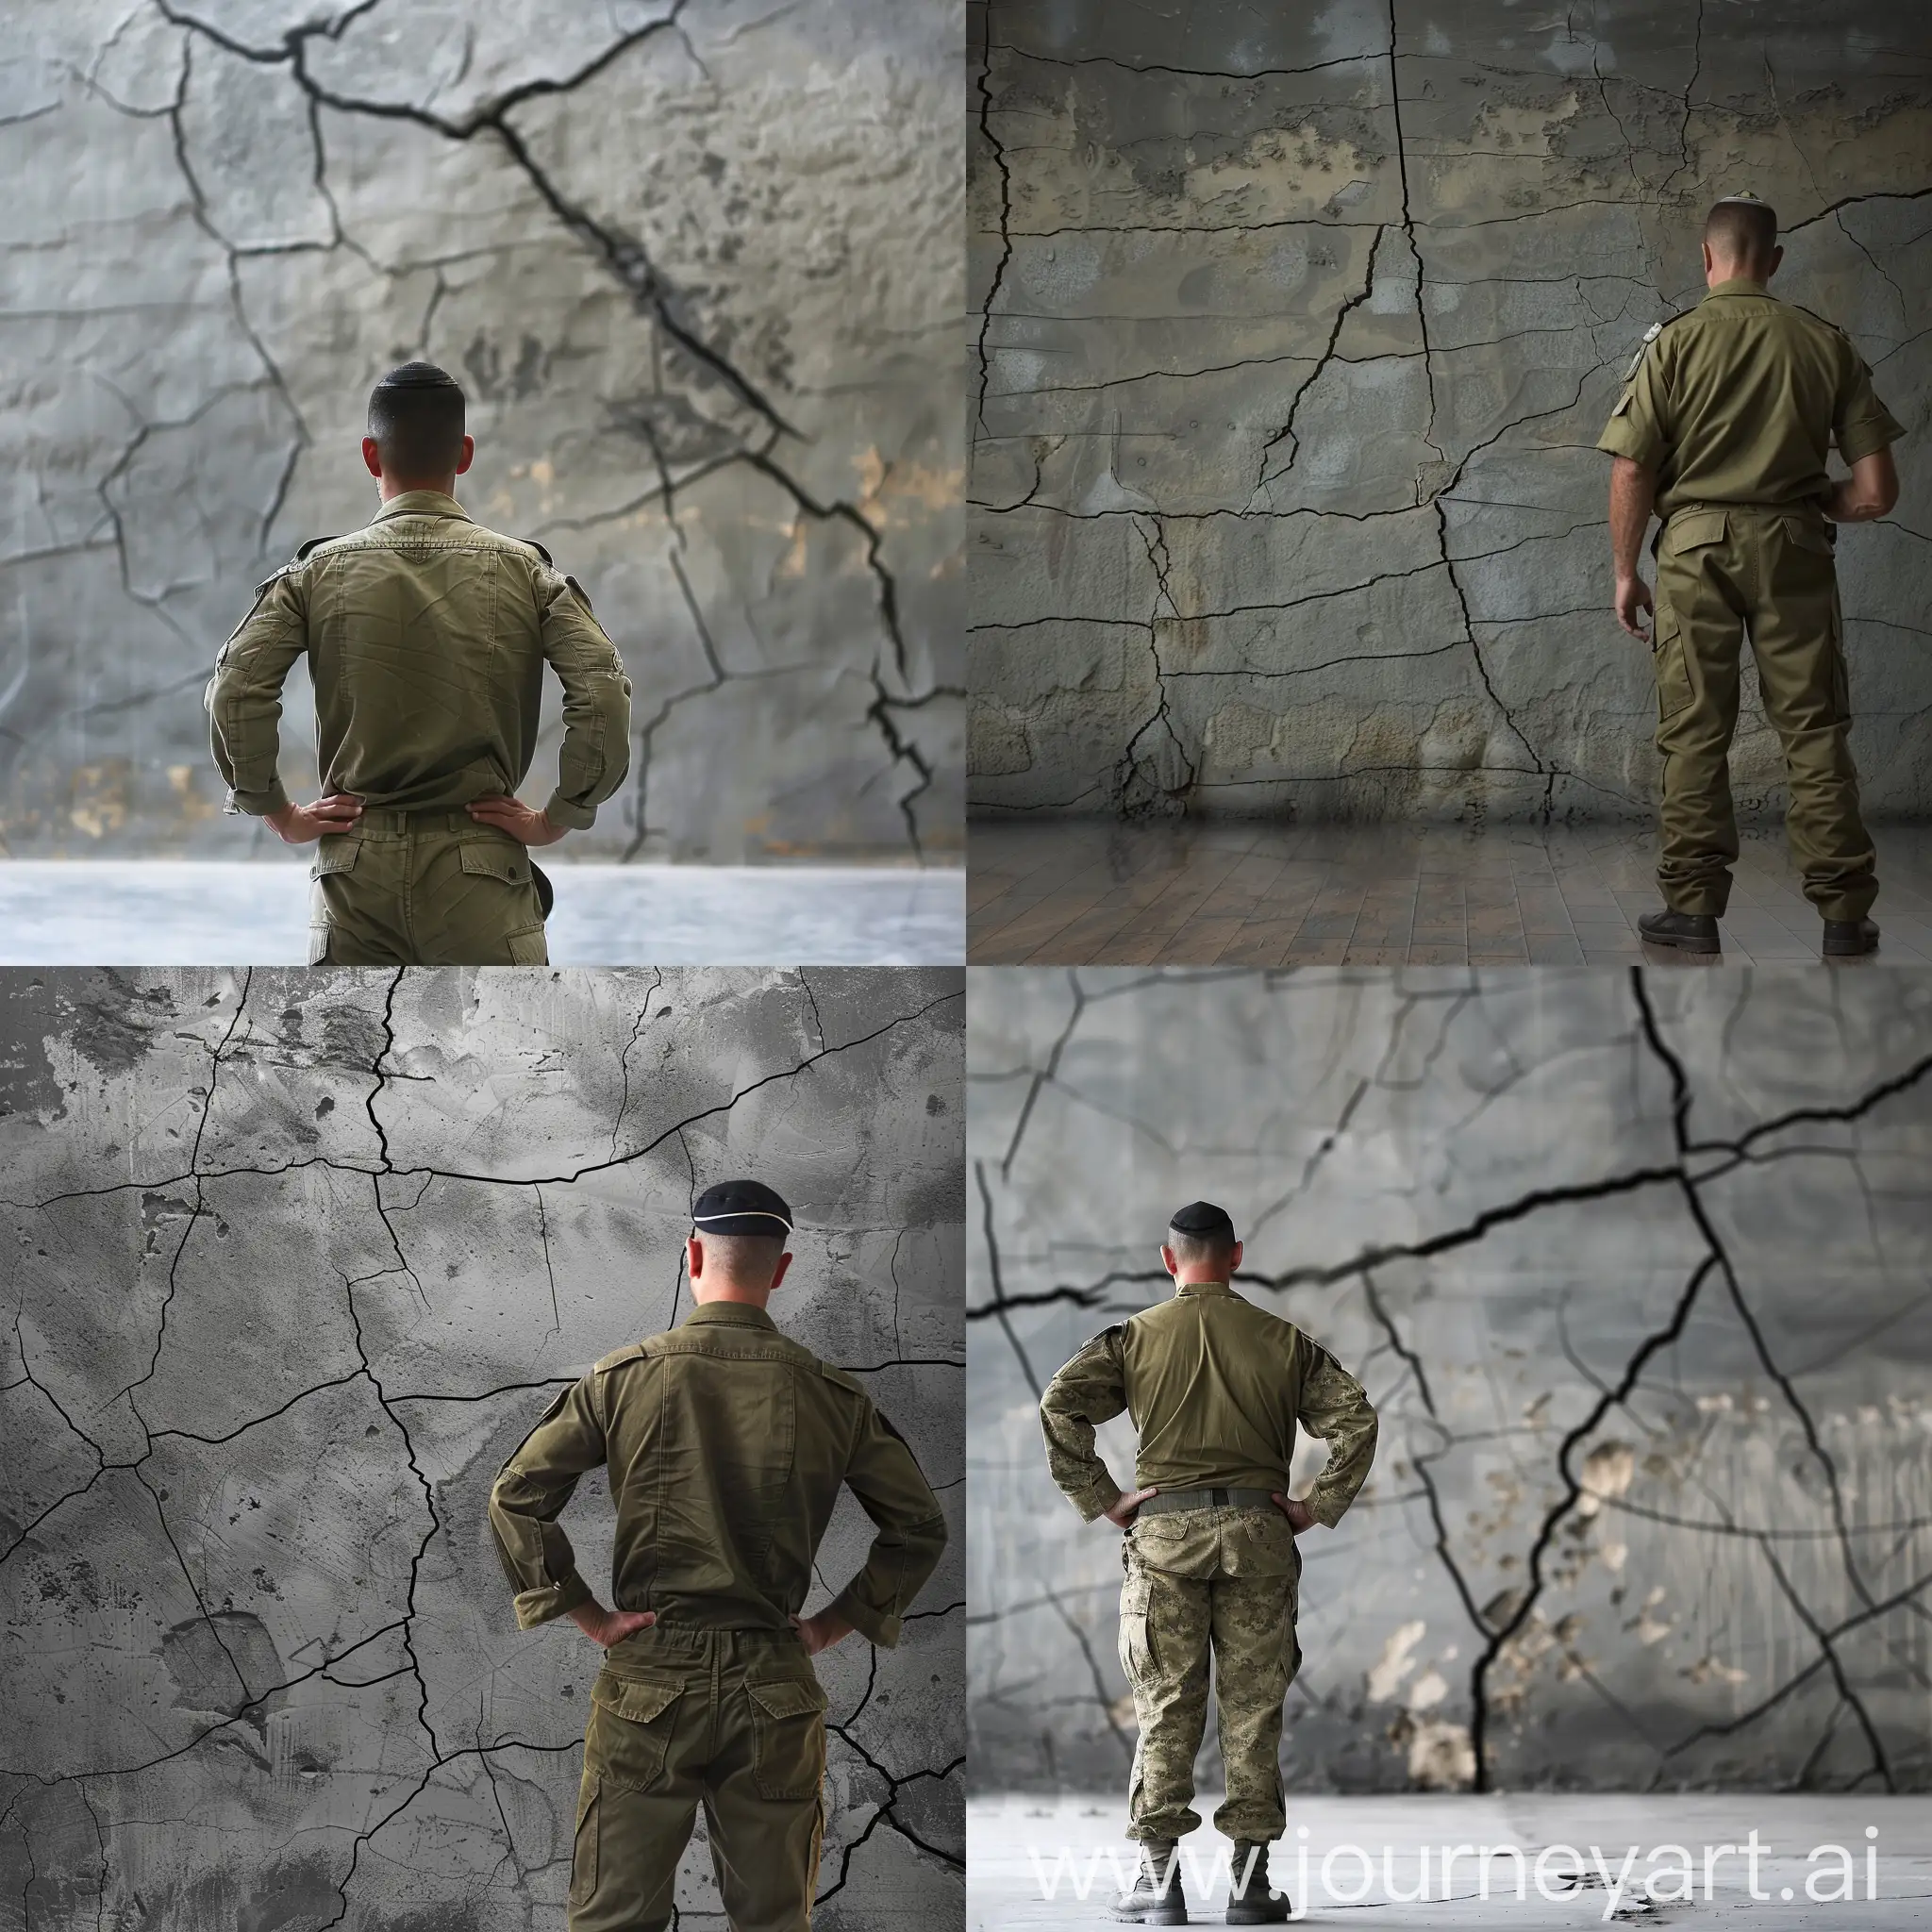 An Israeli soldier in a straight position with his hands back. In the background, there is a cracked gray wall